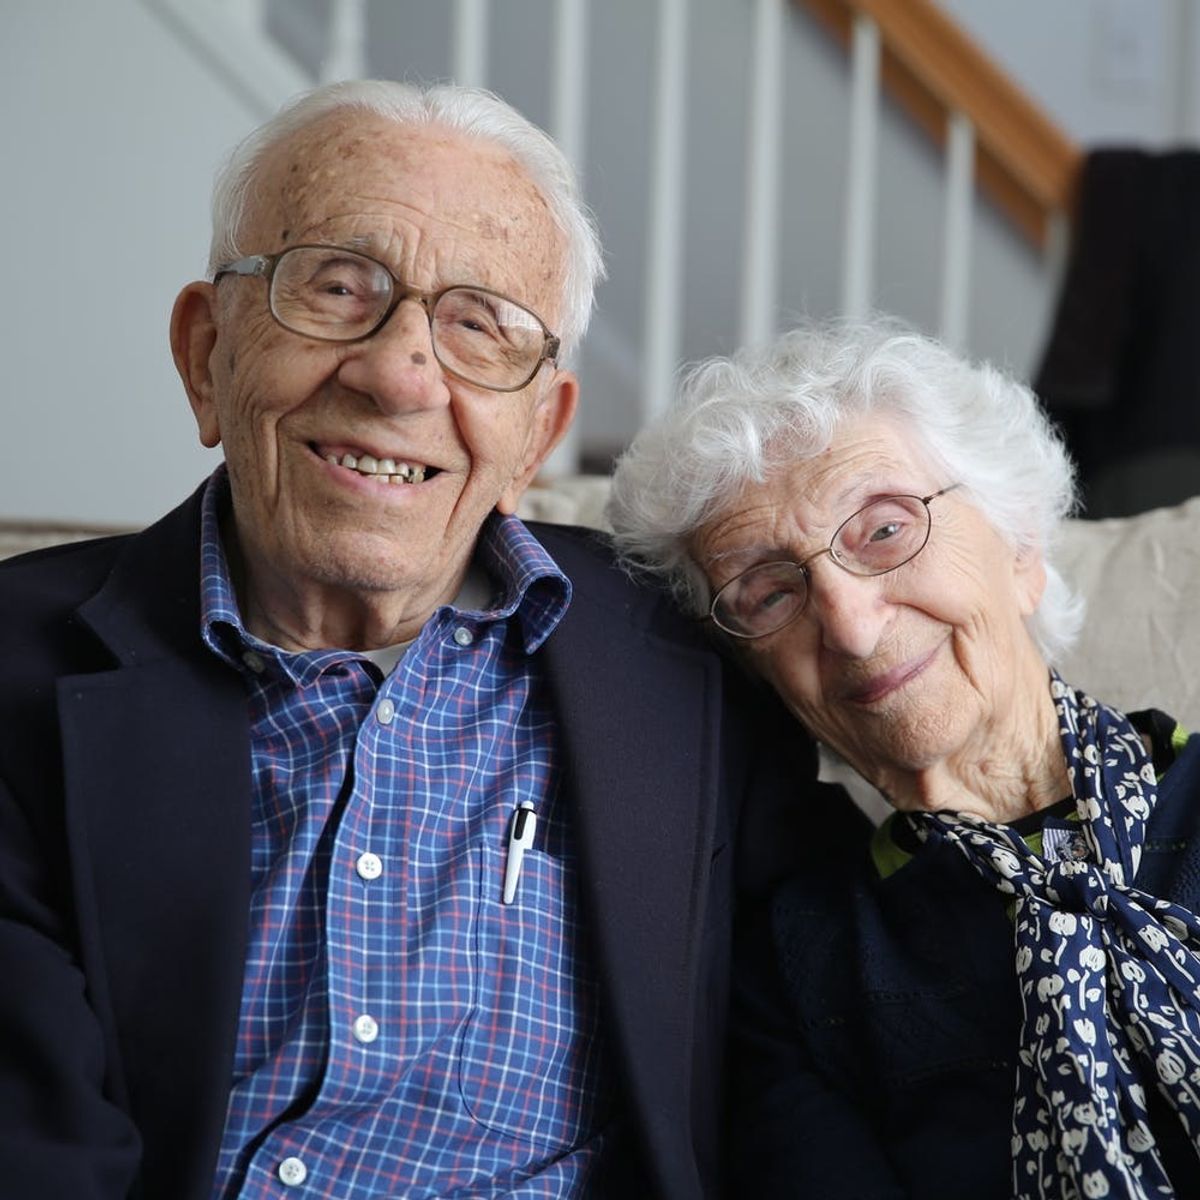 Get Valentine’s Day Love Advice from America’s Longest-Married Couple